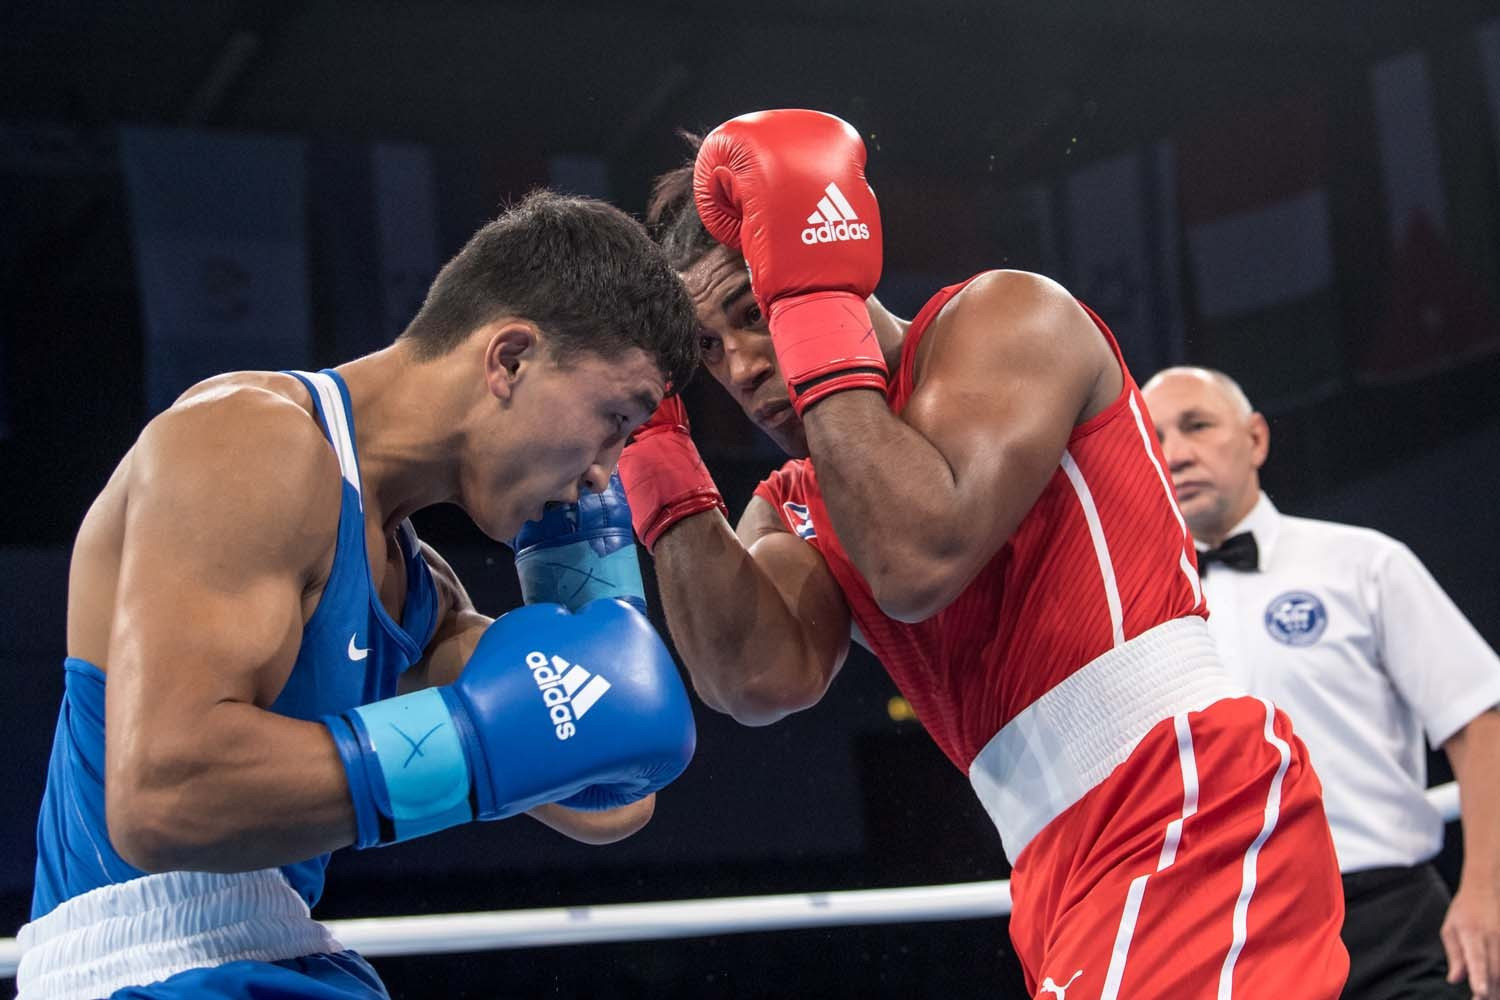 Kazakhstan's Abilkhan Amankul, left, pictured in action at last year's World Championships, was among the winners today for the Kazakhstan team ©AIBA